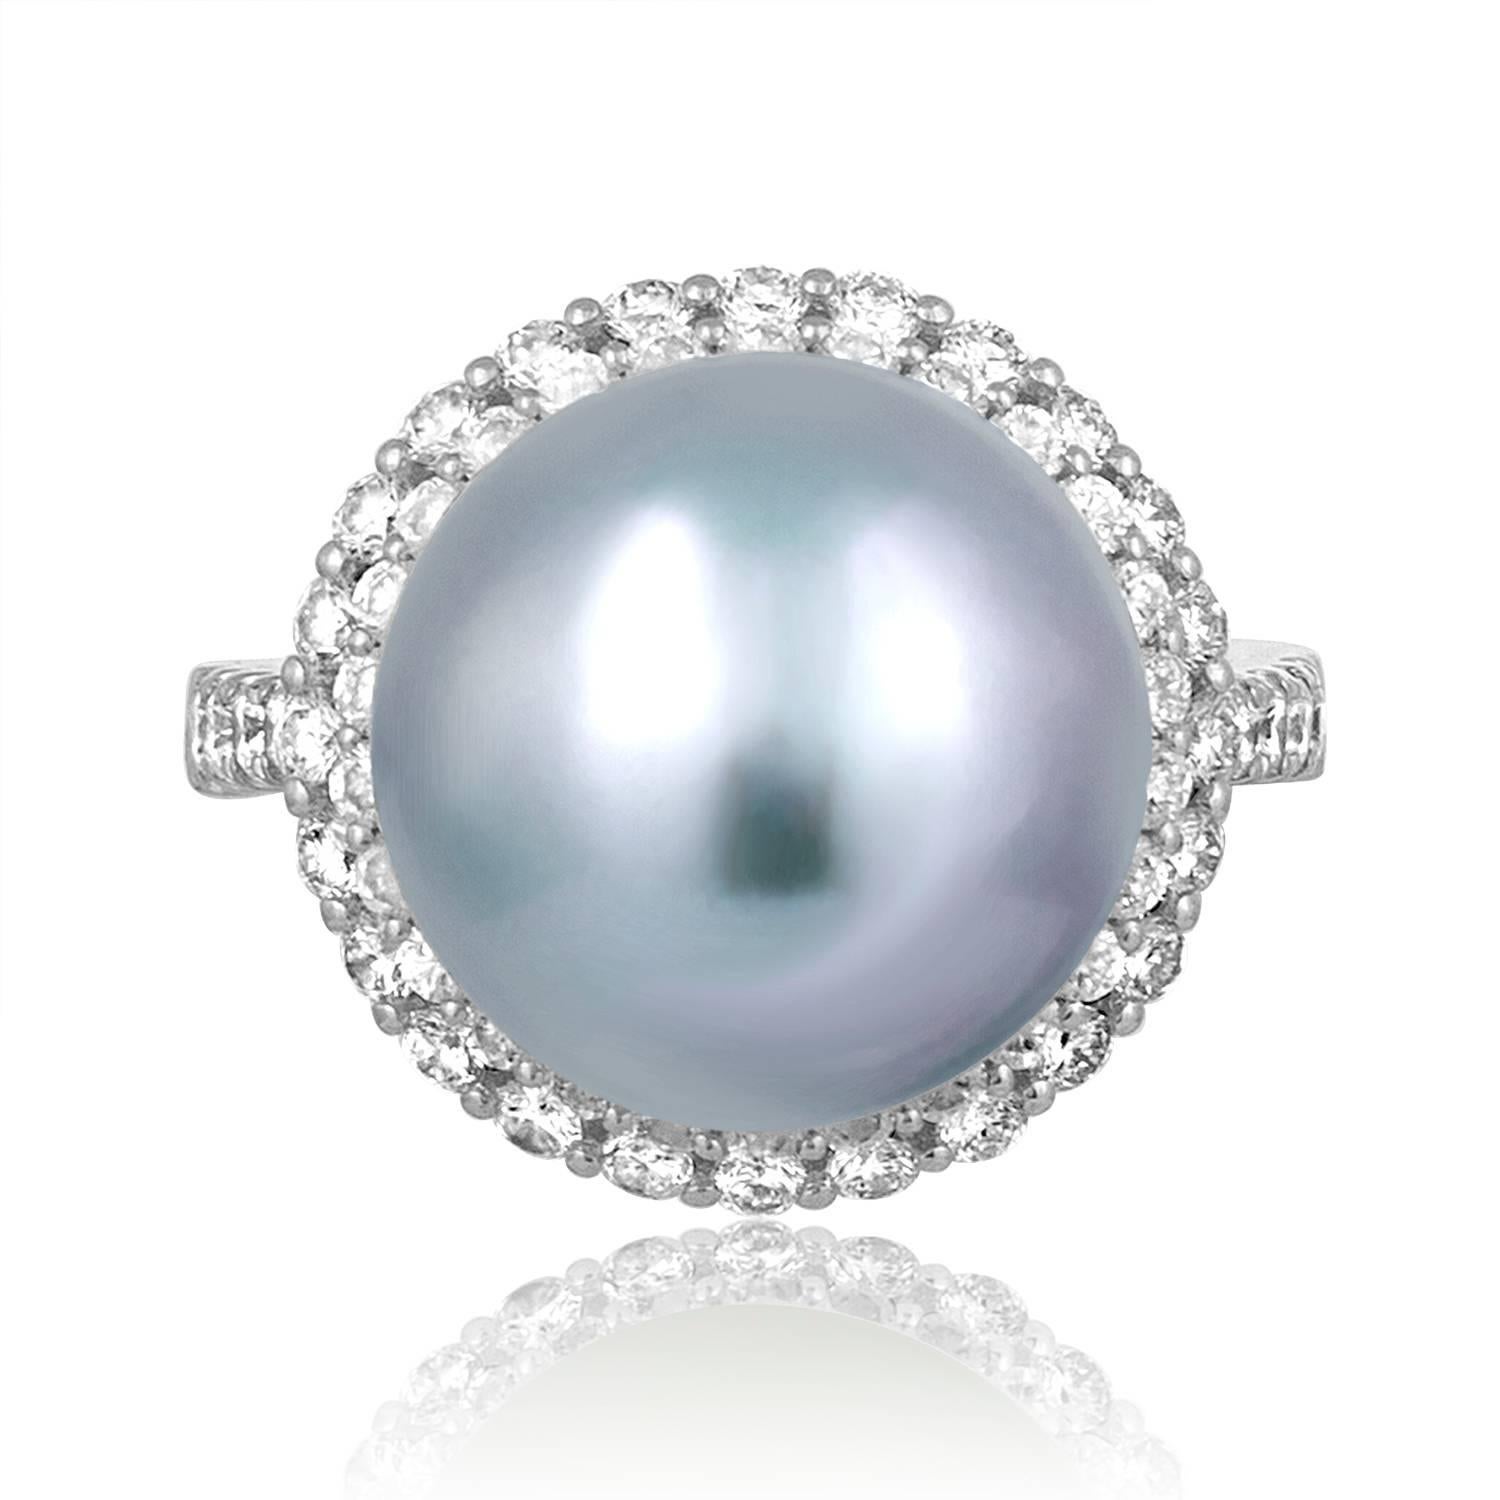 Very Unusual Color Pearl Ring
The ring is 18K White Gold
There are 1.18 Carats In Diamonds F/G SI
The ring has a 14mm South Sea Pearl
The pearl is Bluish Pink in Color
The pearl changes color depending on the light.
The ring weighs 9.0